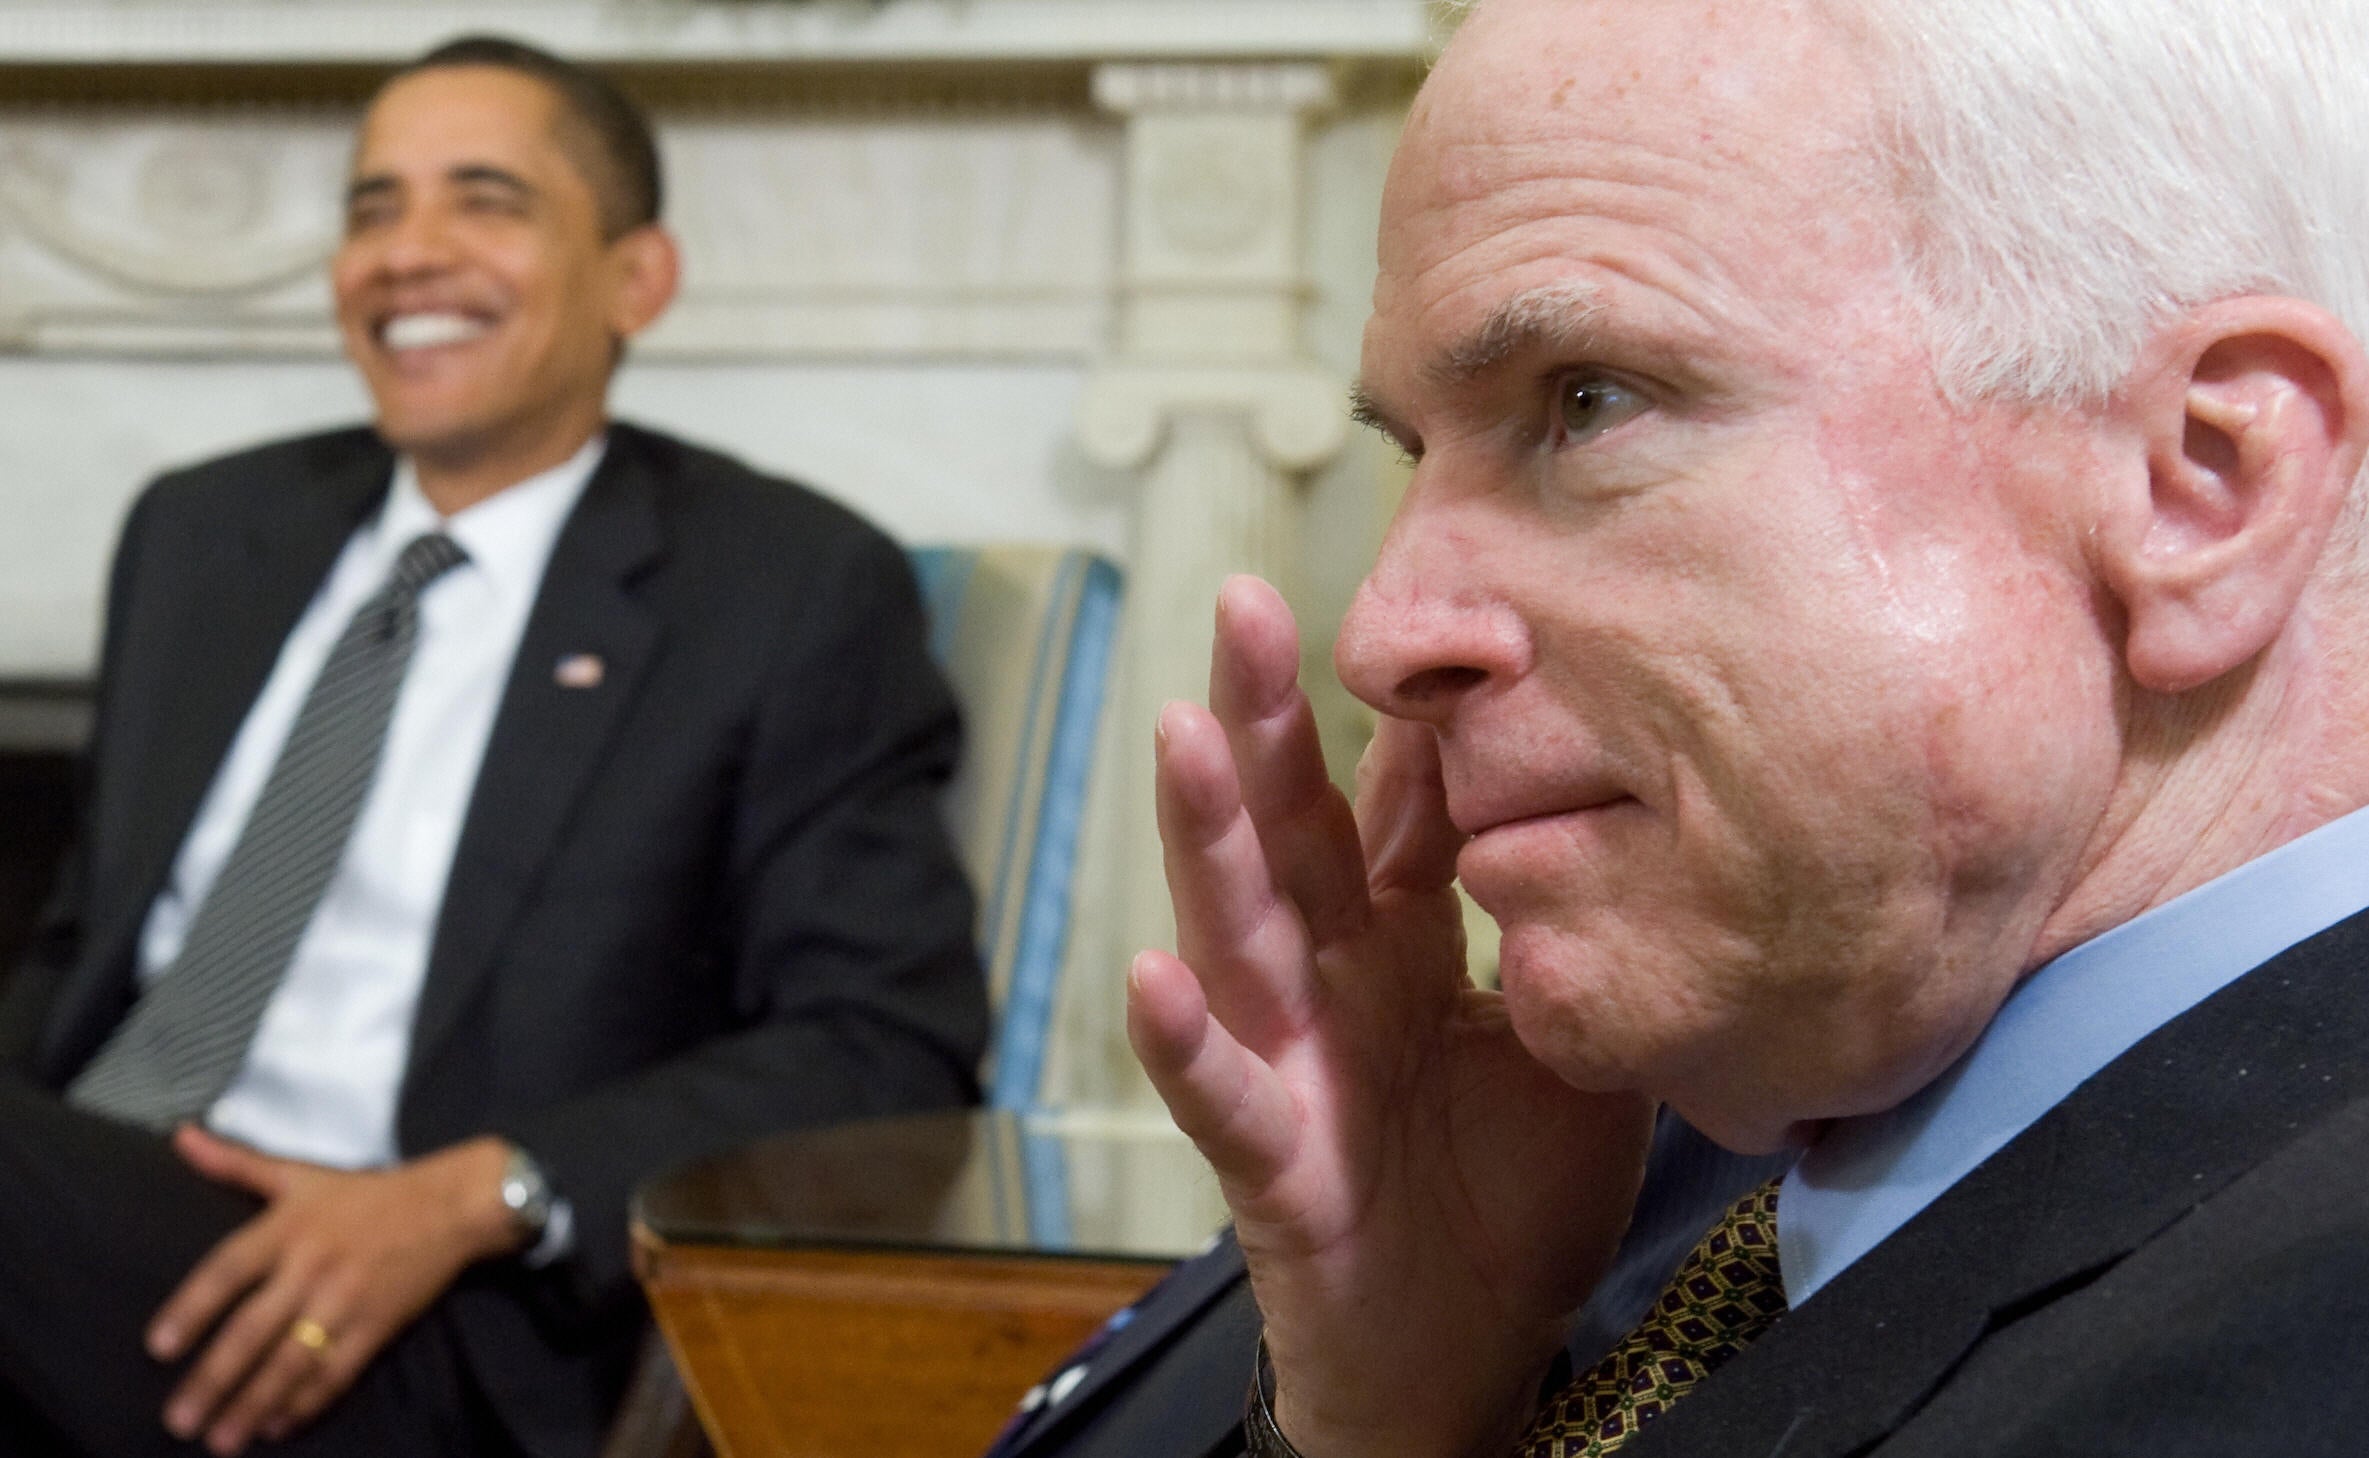 'Give It Hell:' Barack Obama Tweets Support For John McCain After Senator's Cancer Diagnosis
